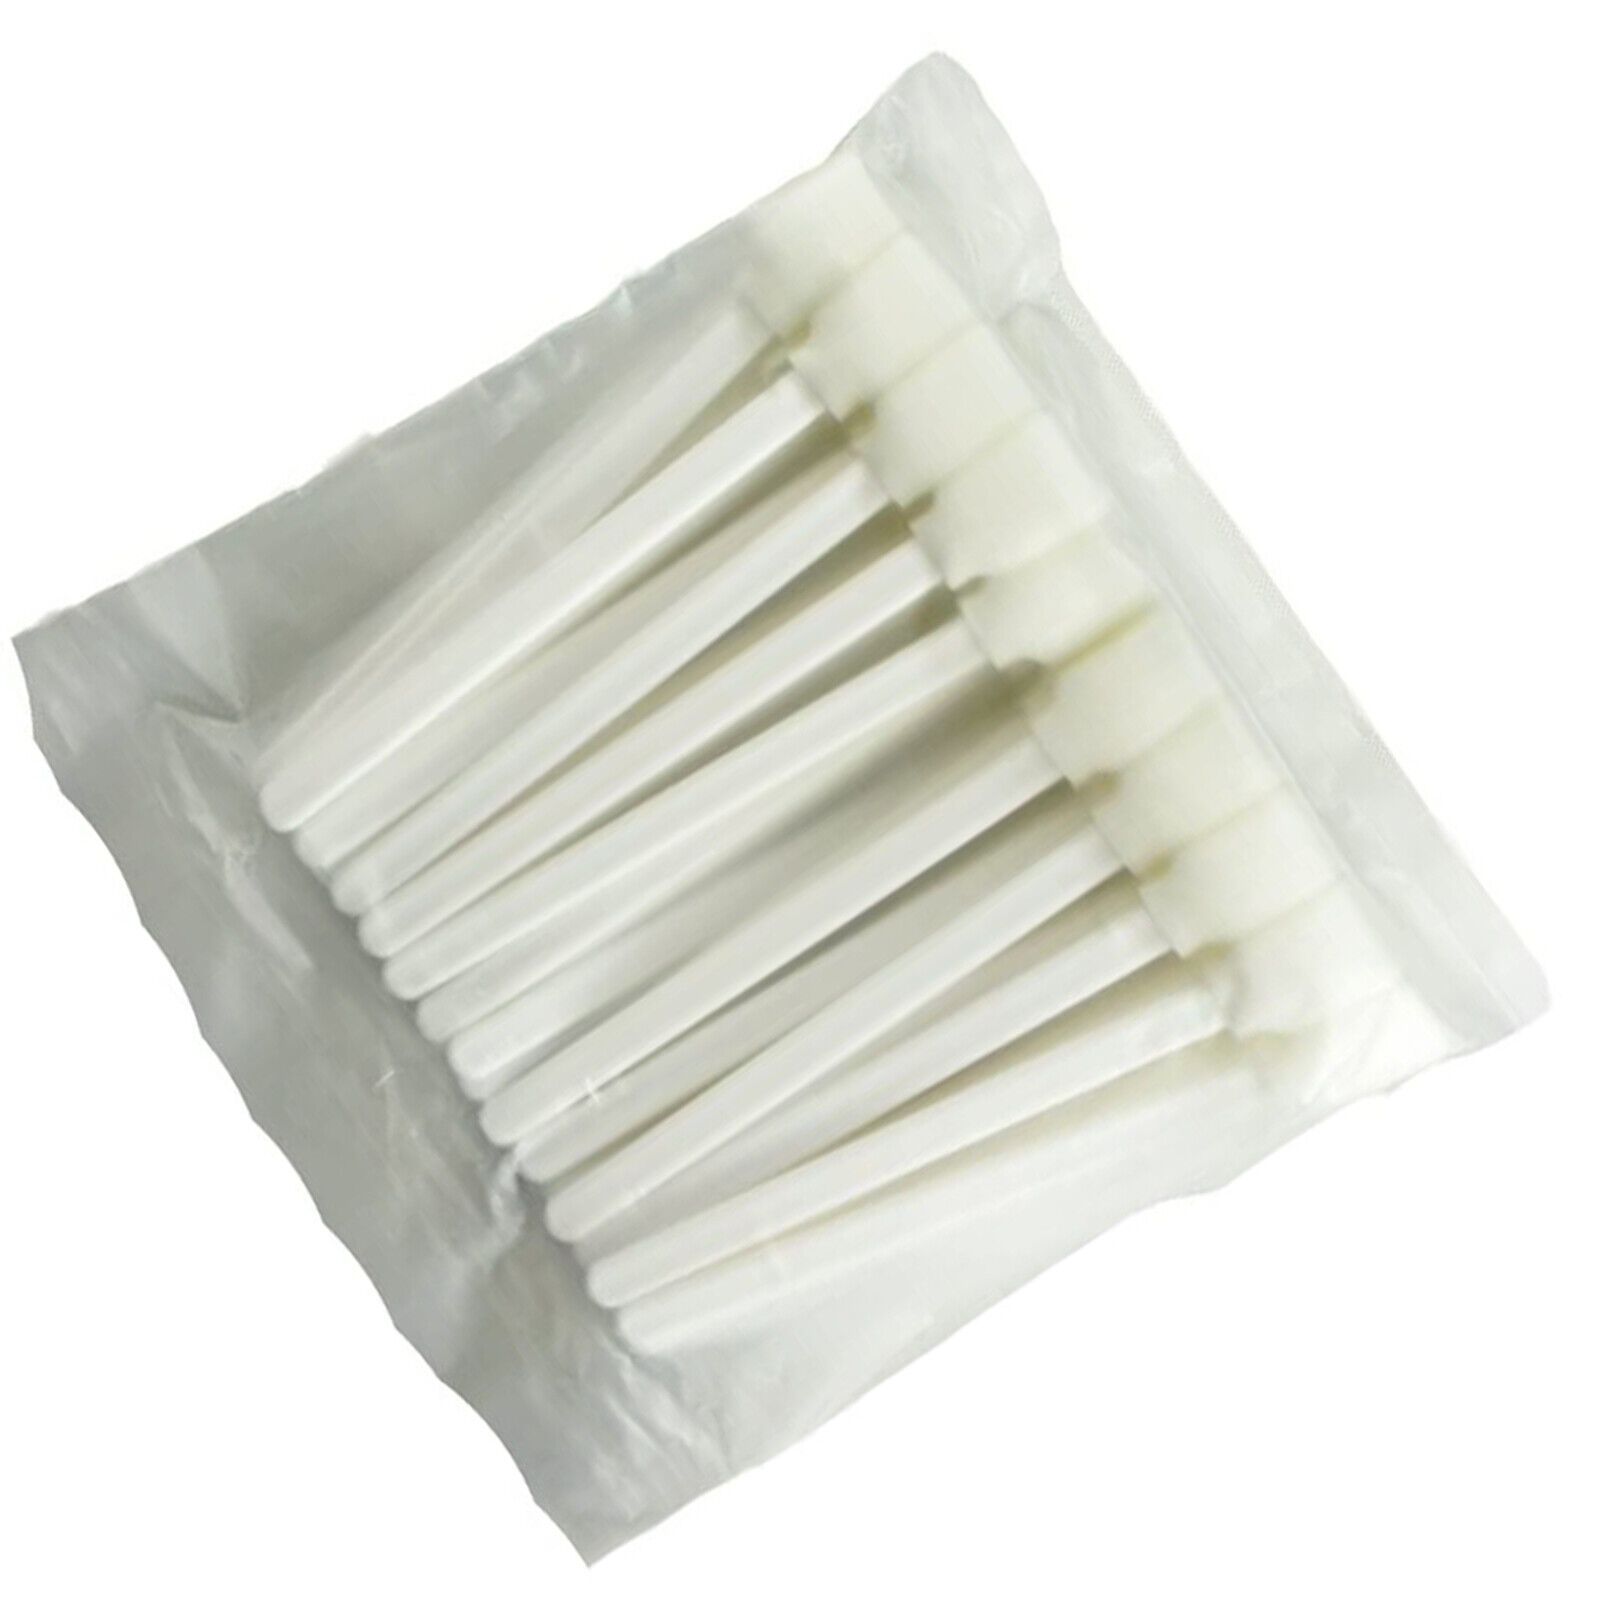 50Pack Cleaning Swabs Foam Tipped Stick For Roland Mimaki Mutoh Epson Printer C